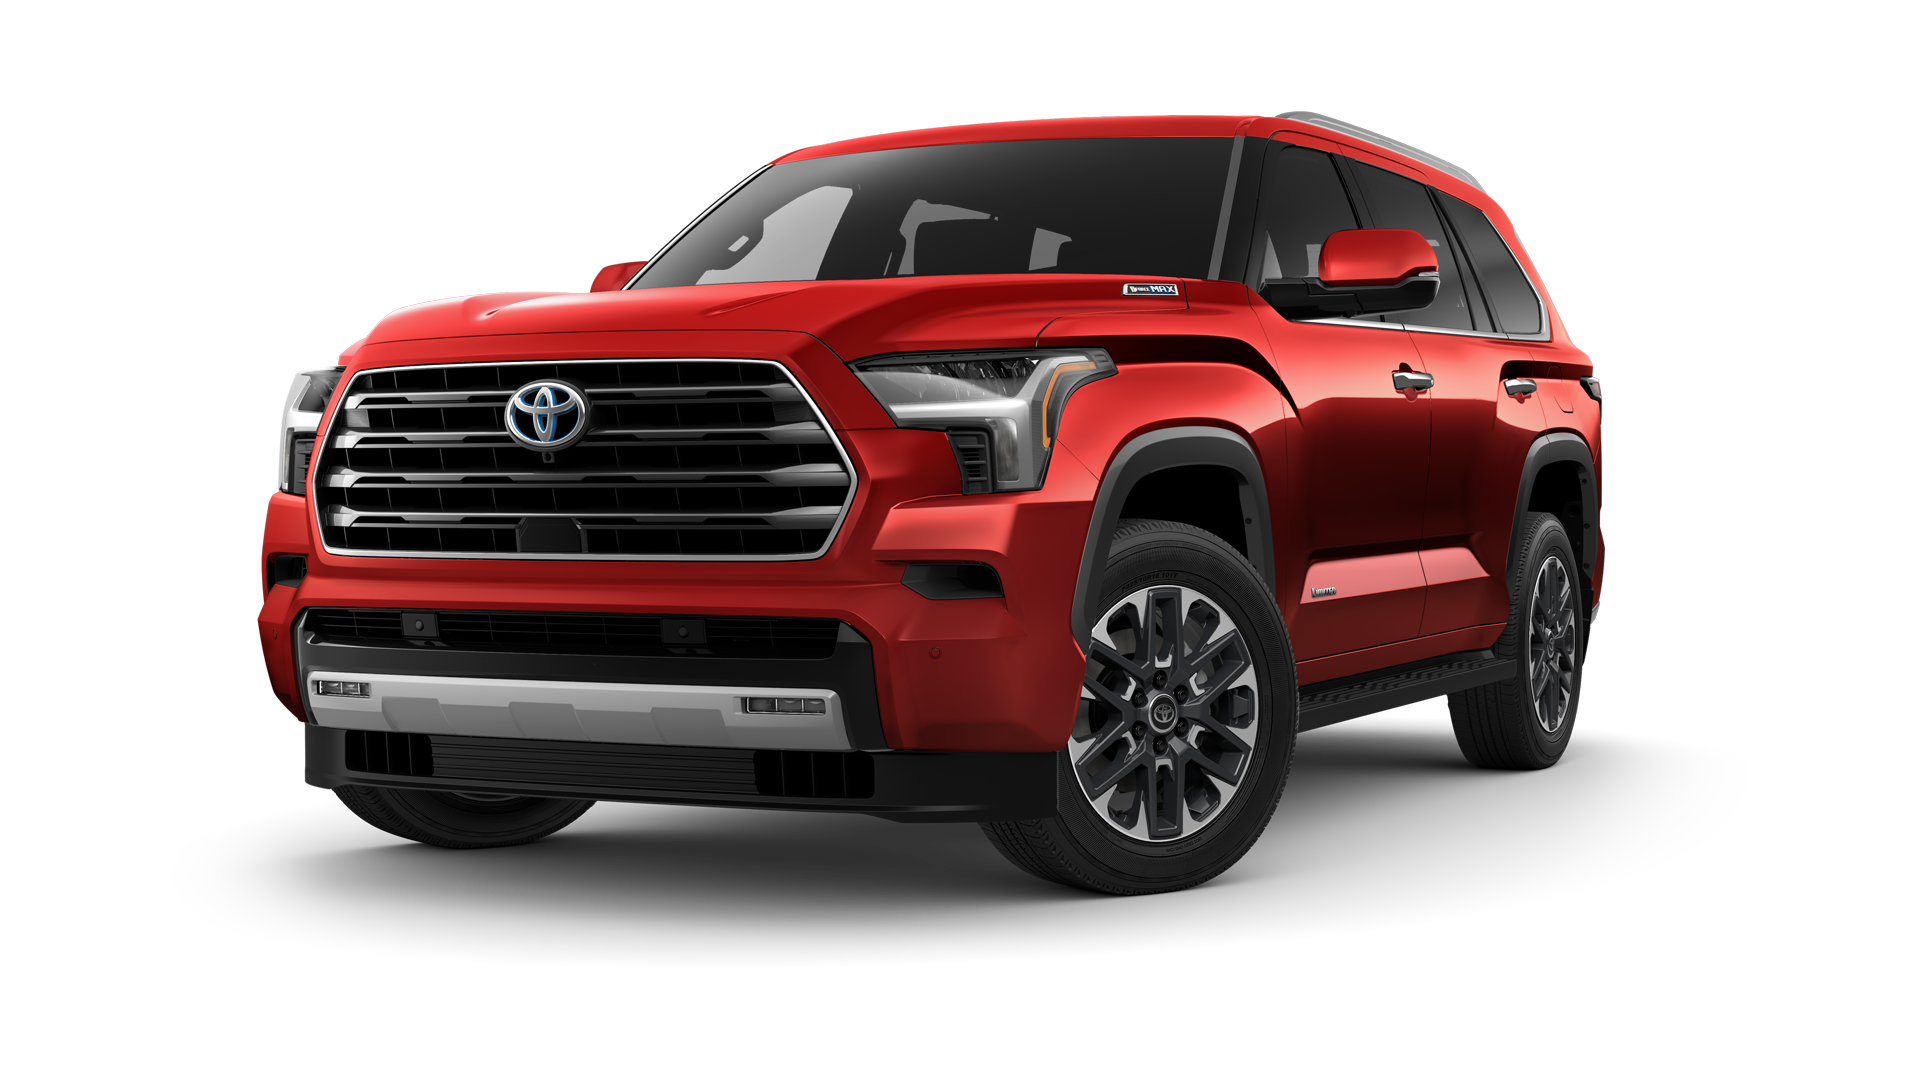 2024 Toyota Sequoia in Supersonic Red*.